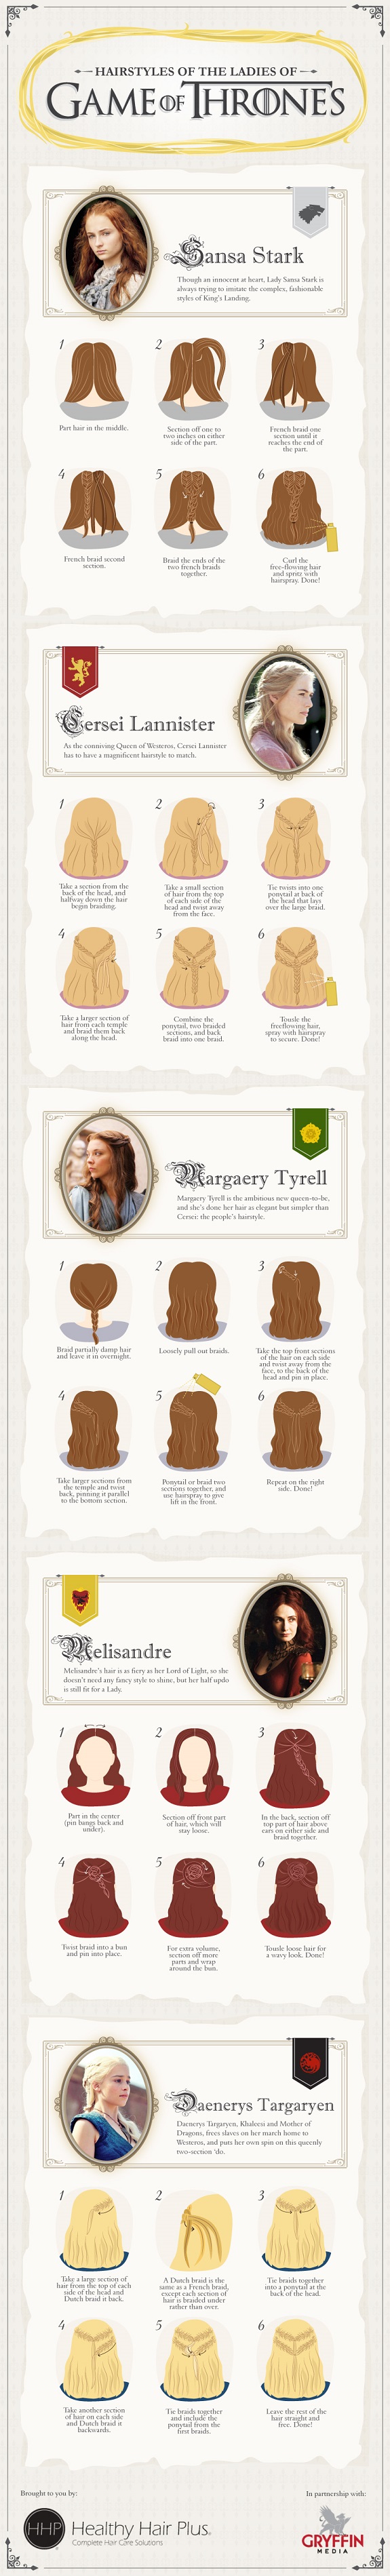 Hairstyles of the ladies of Game of Thrones